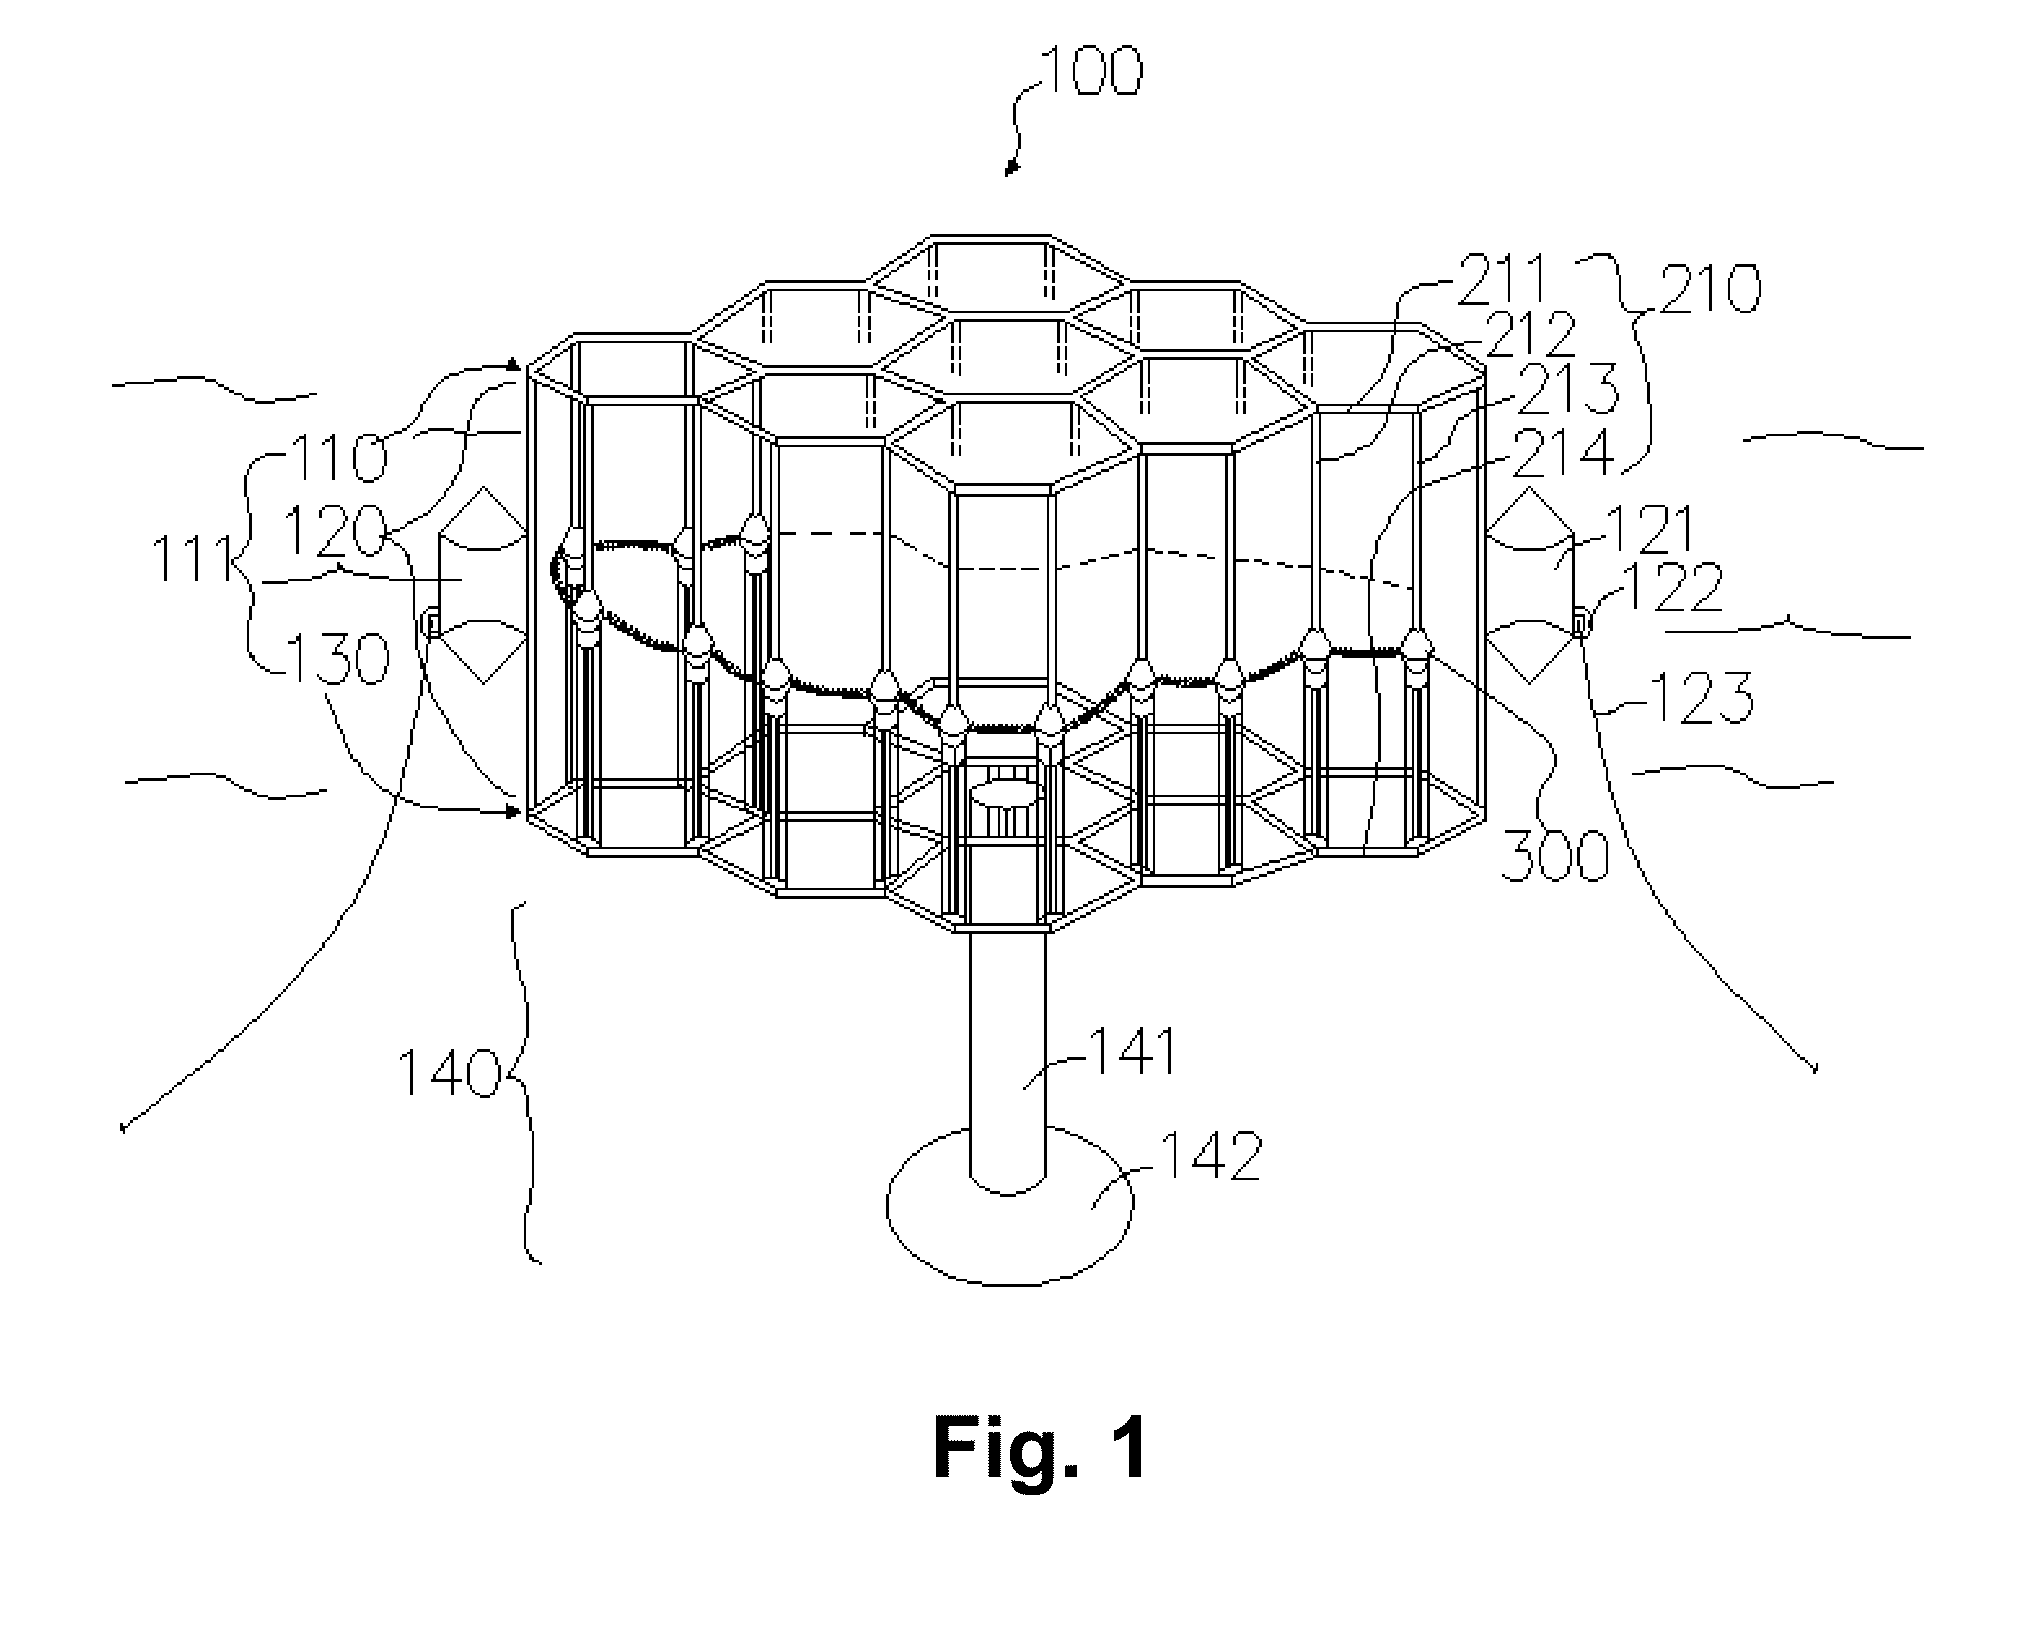 Apparatus for converting wave energy into electrical energy